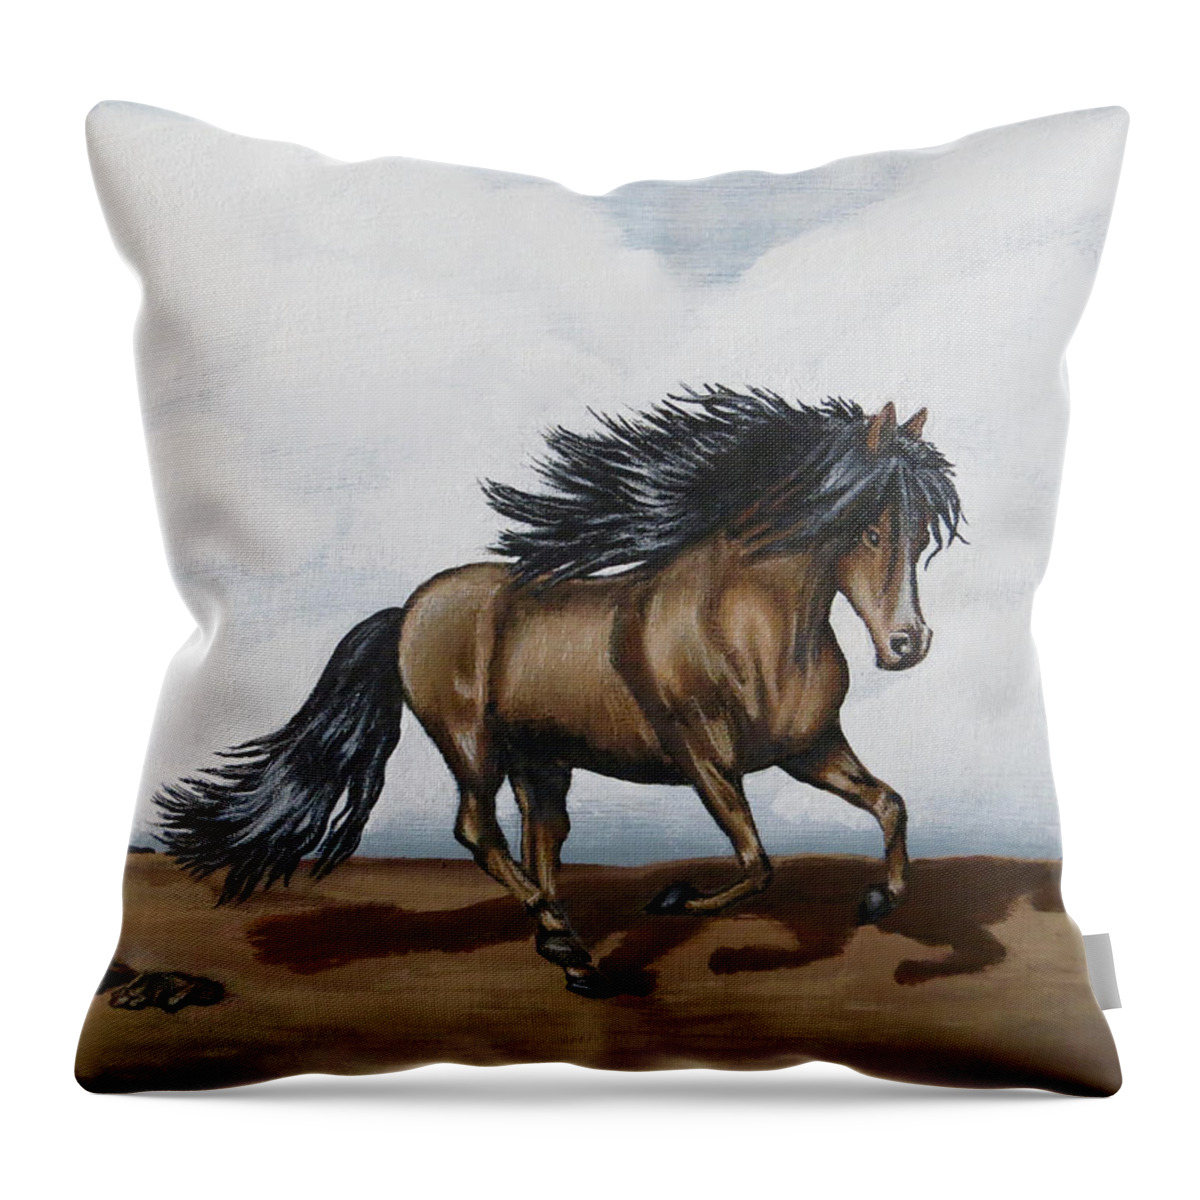 Horse Throw Pillow featuring the painting Coco by Teresa Wing